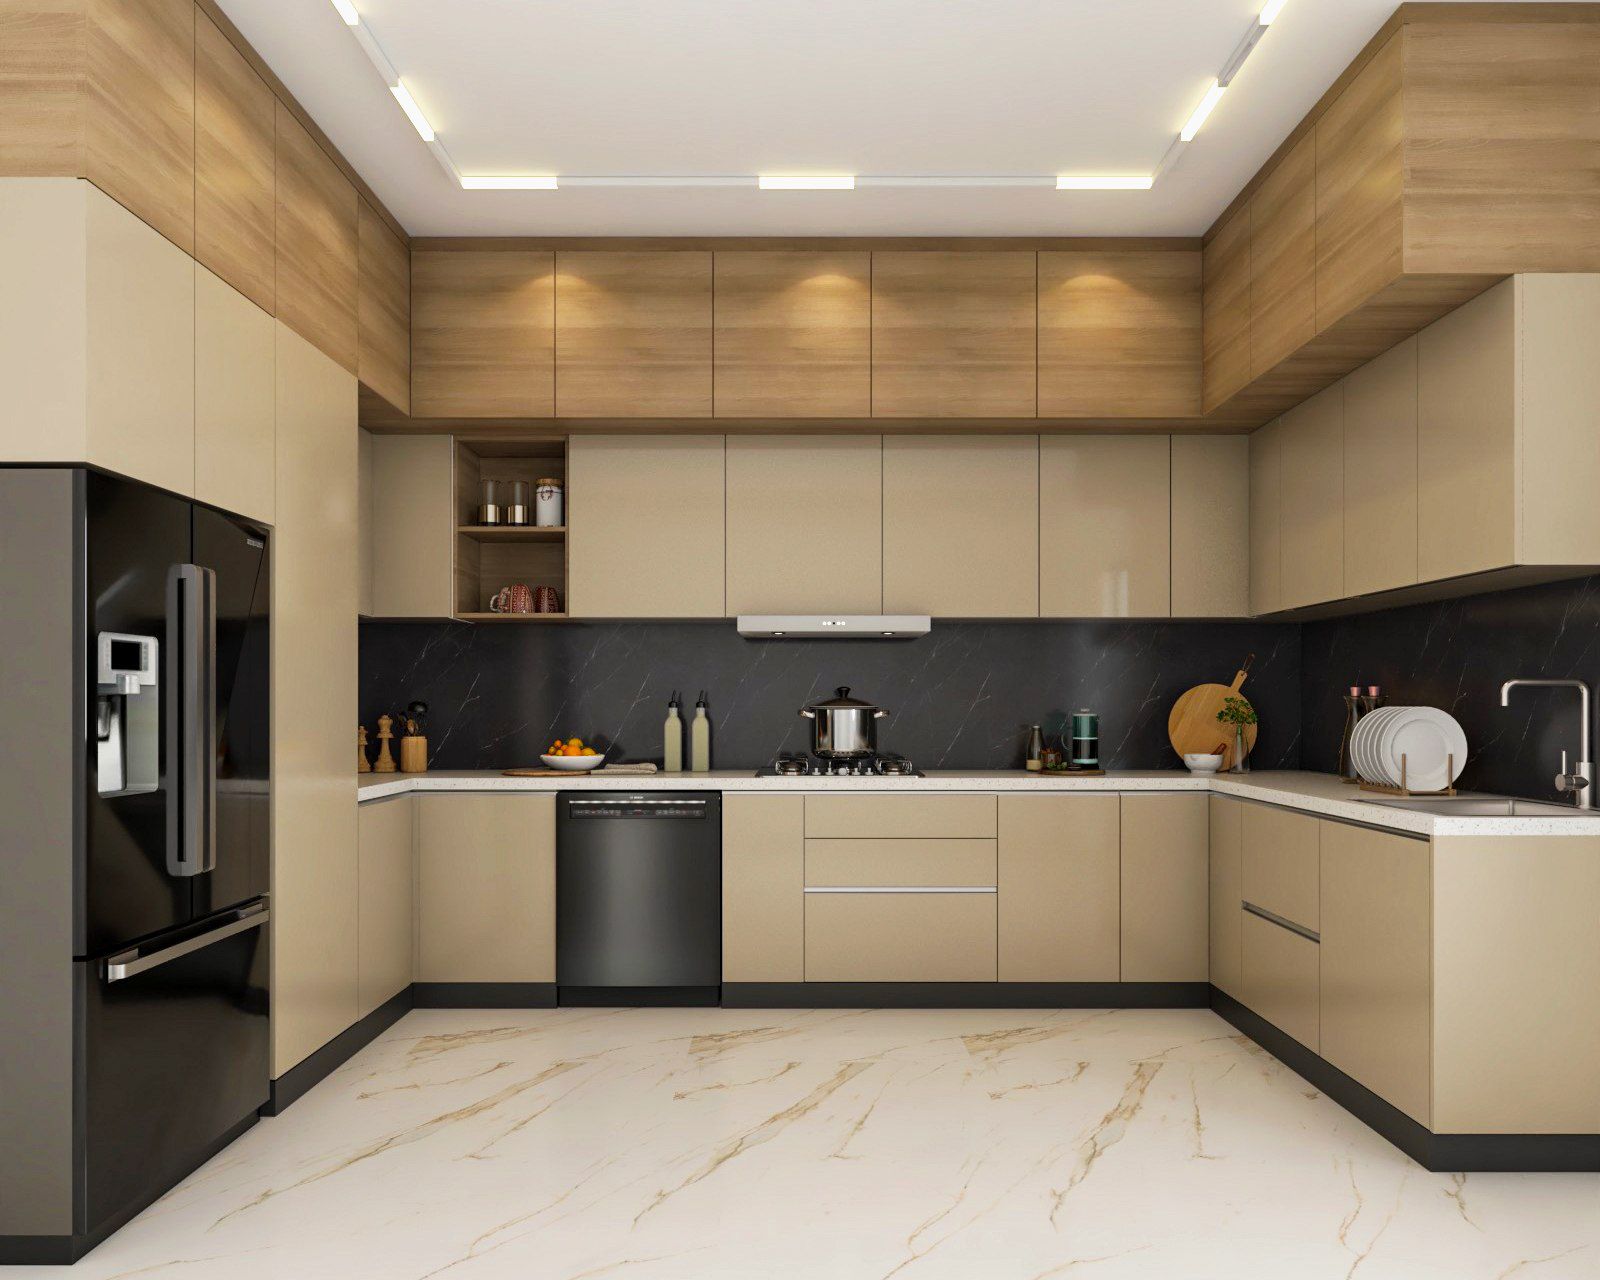 Contemporary Modular U-Shaped Kitchen Design With Beige And Wood Kitchen Cabinets